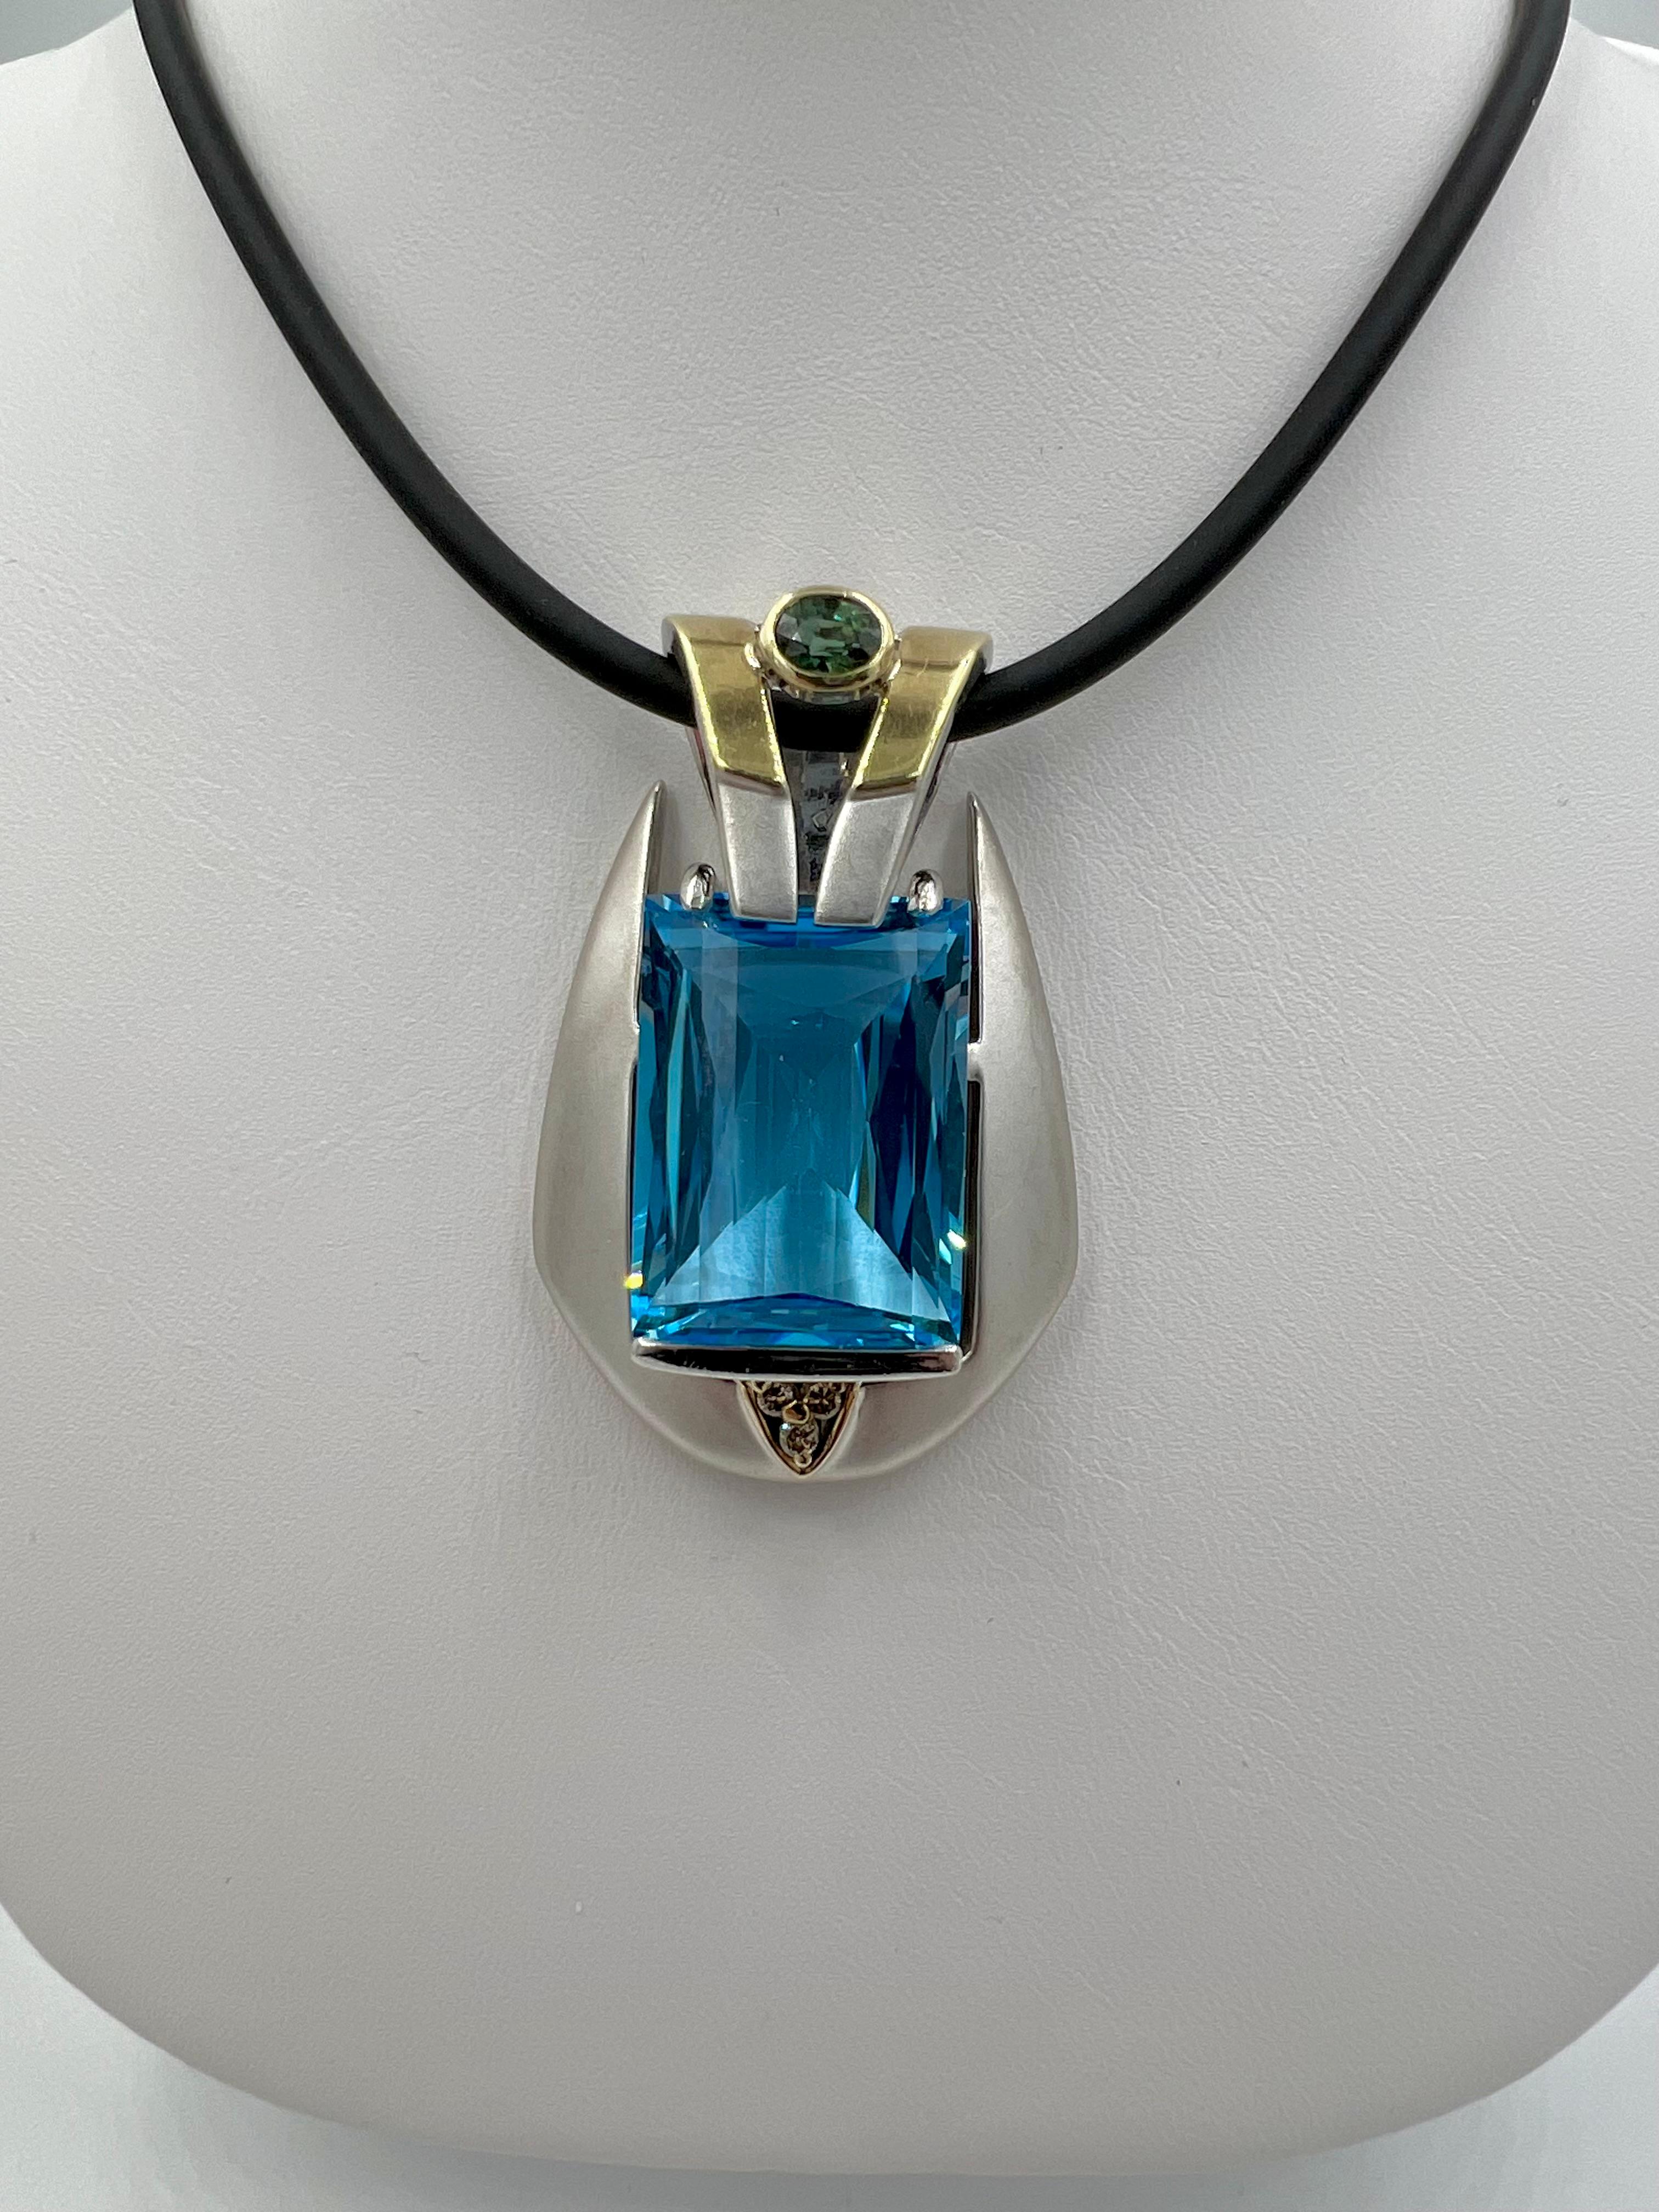 Blue Topaz Tourmaline Diamond silver and yellow gold slide pendant, circa 1990s.

   This Blue Topaz pendant is one show stopper! The scale and boldness along with fine hand made craftmanship make this pendant unique and one of a kind.  Not only is